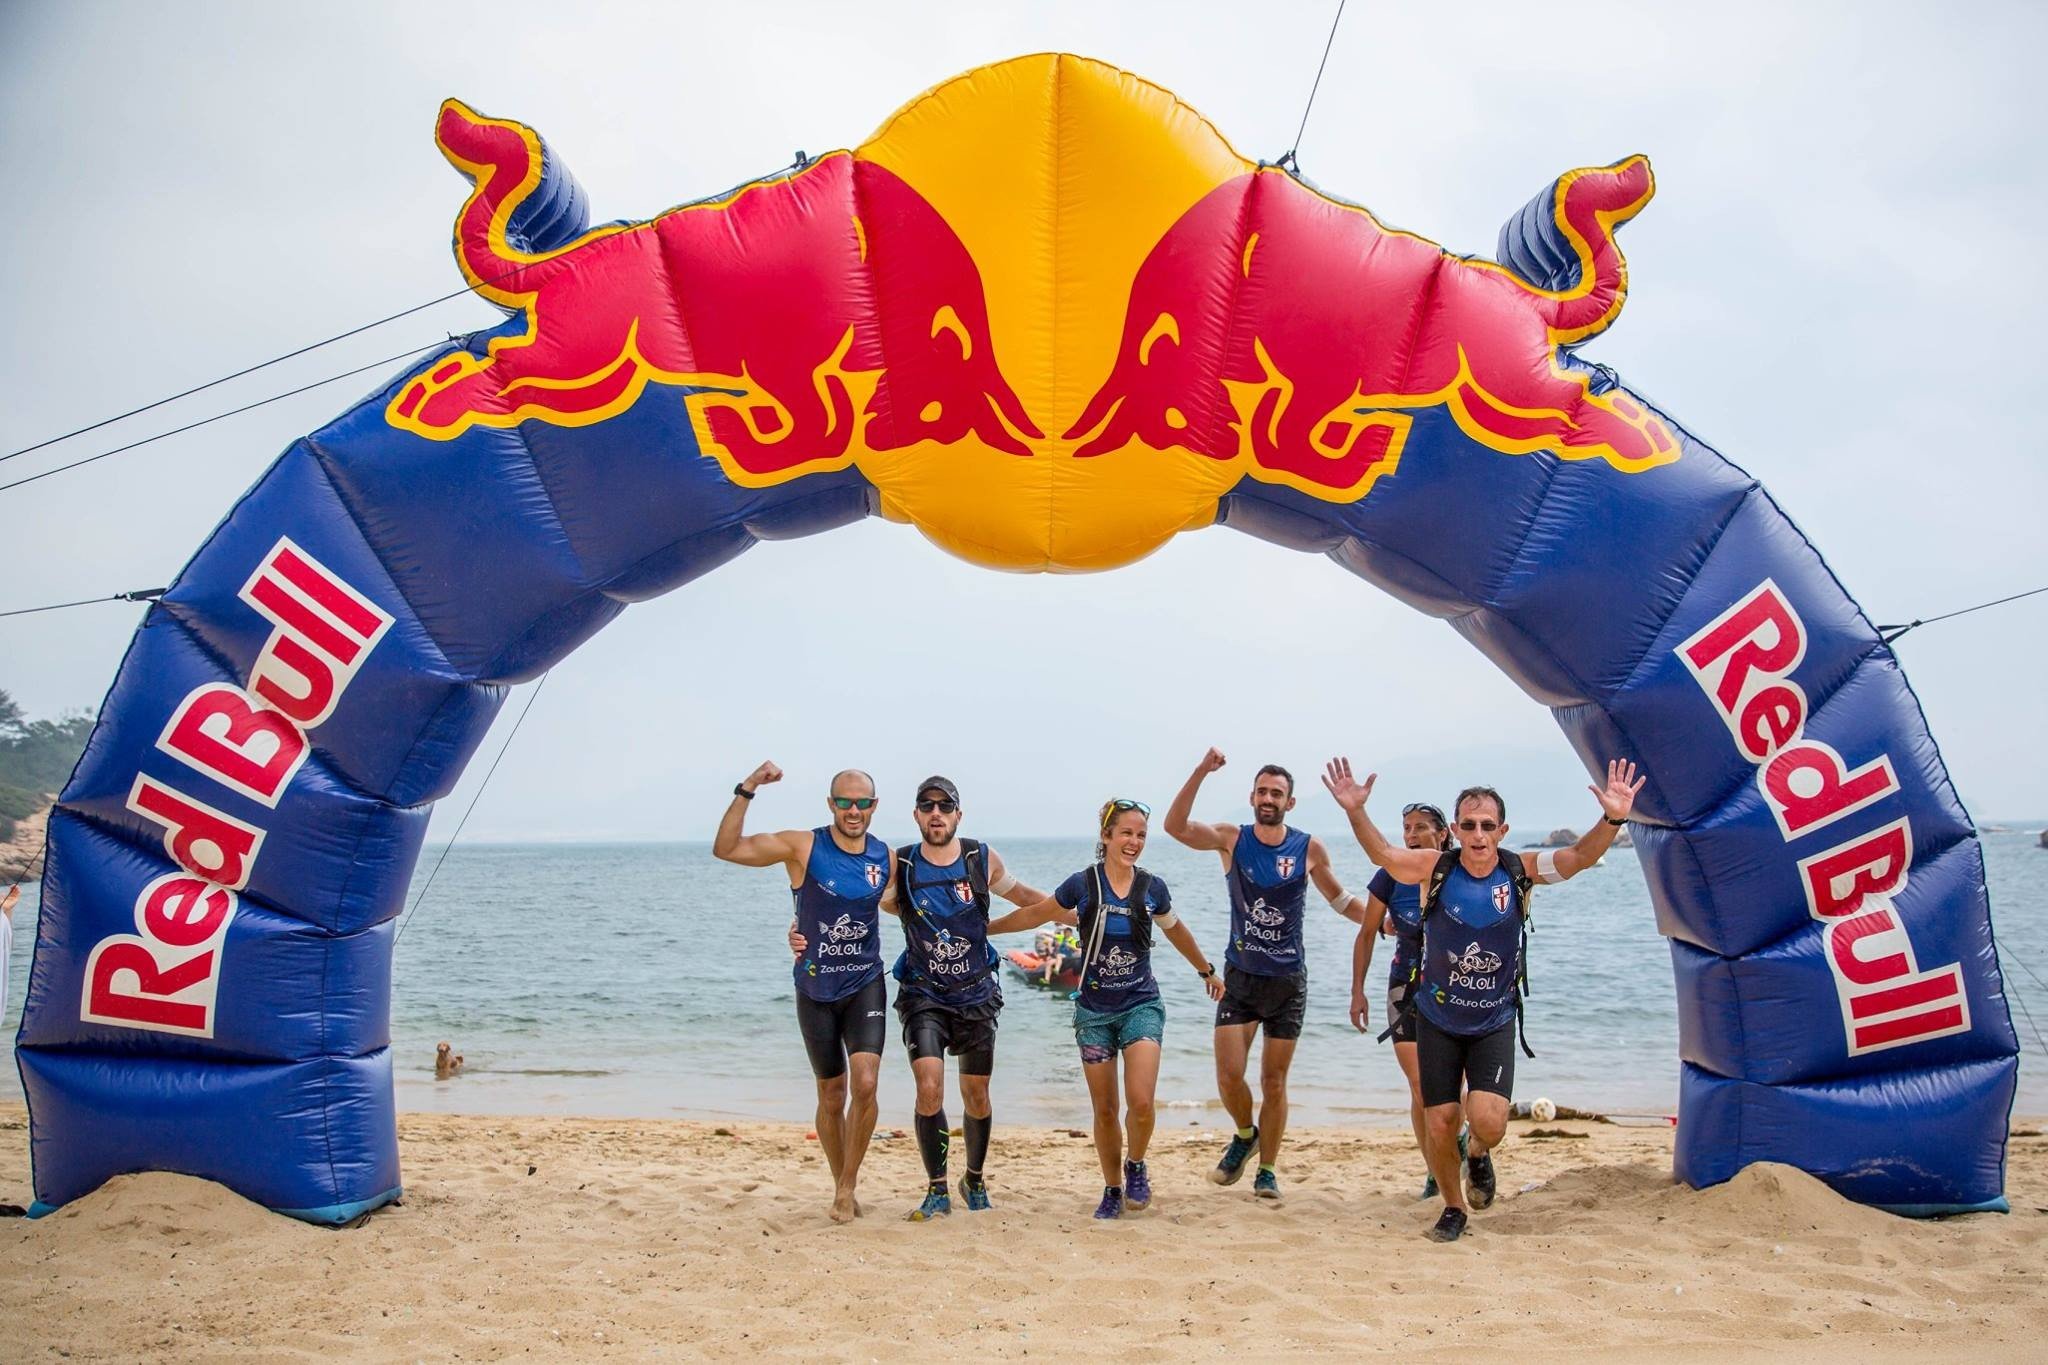 Victoria Recreation Club cross the line in record time at the Red Bull 3 Peaks race. Photos: Red Bull